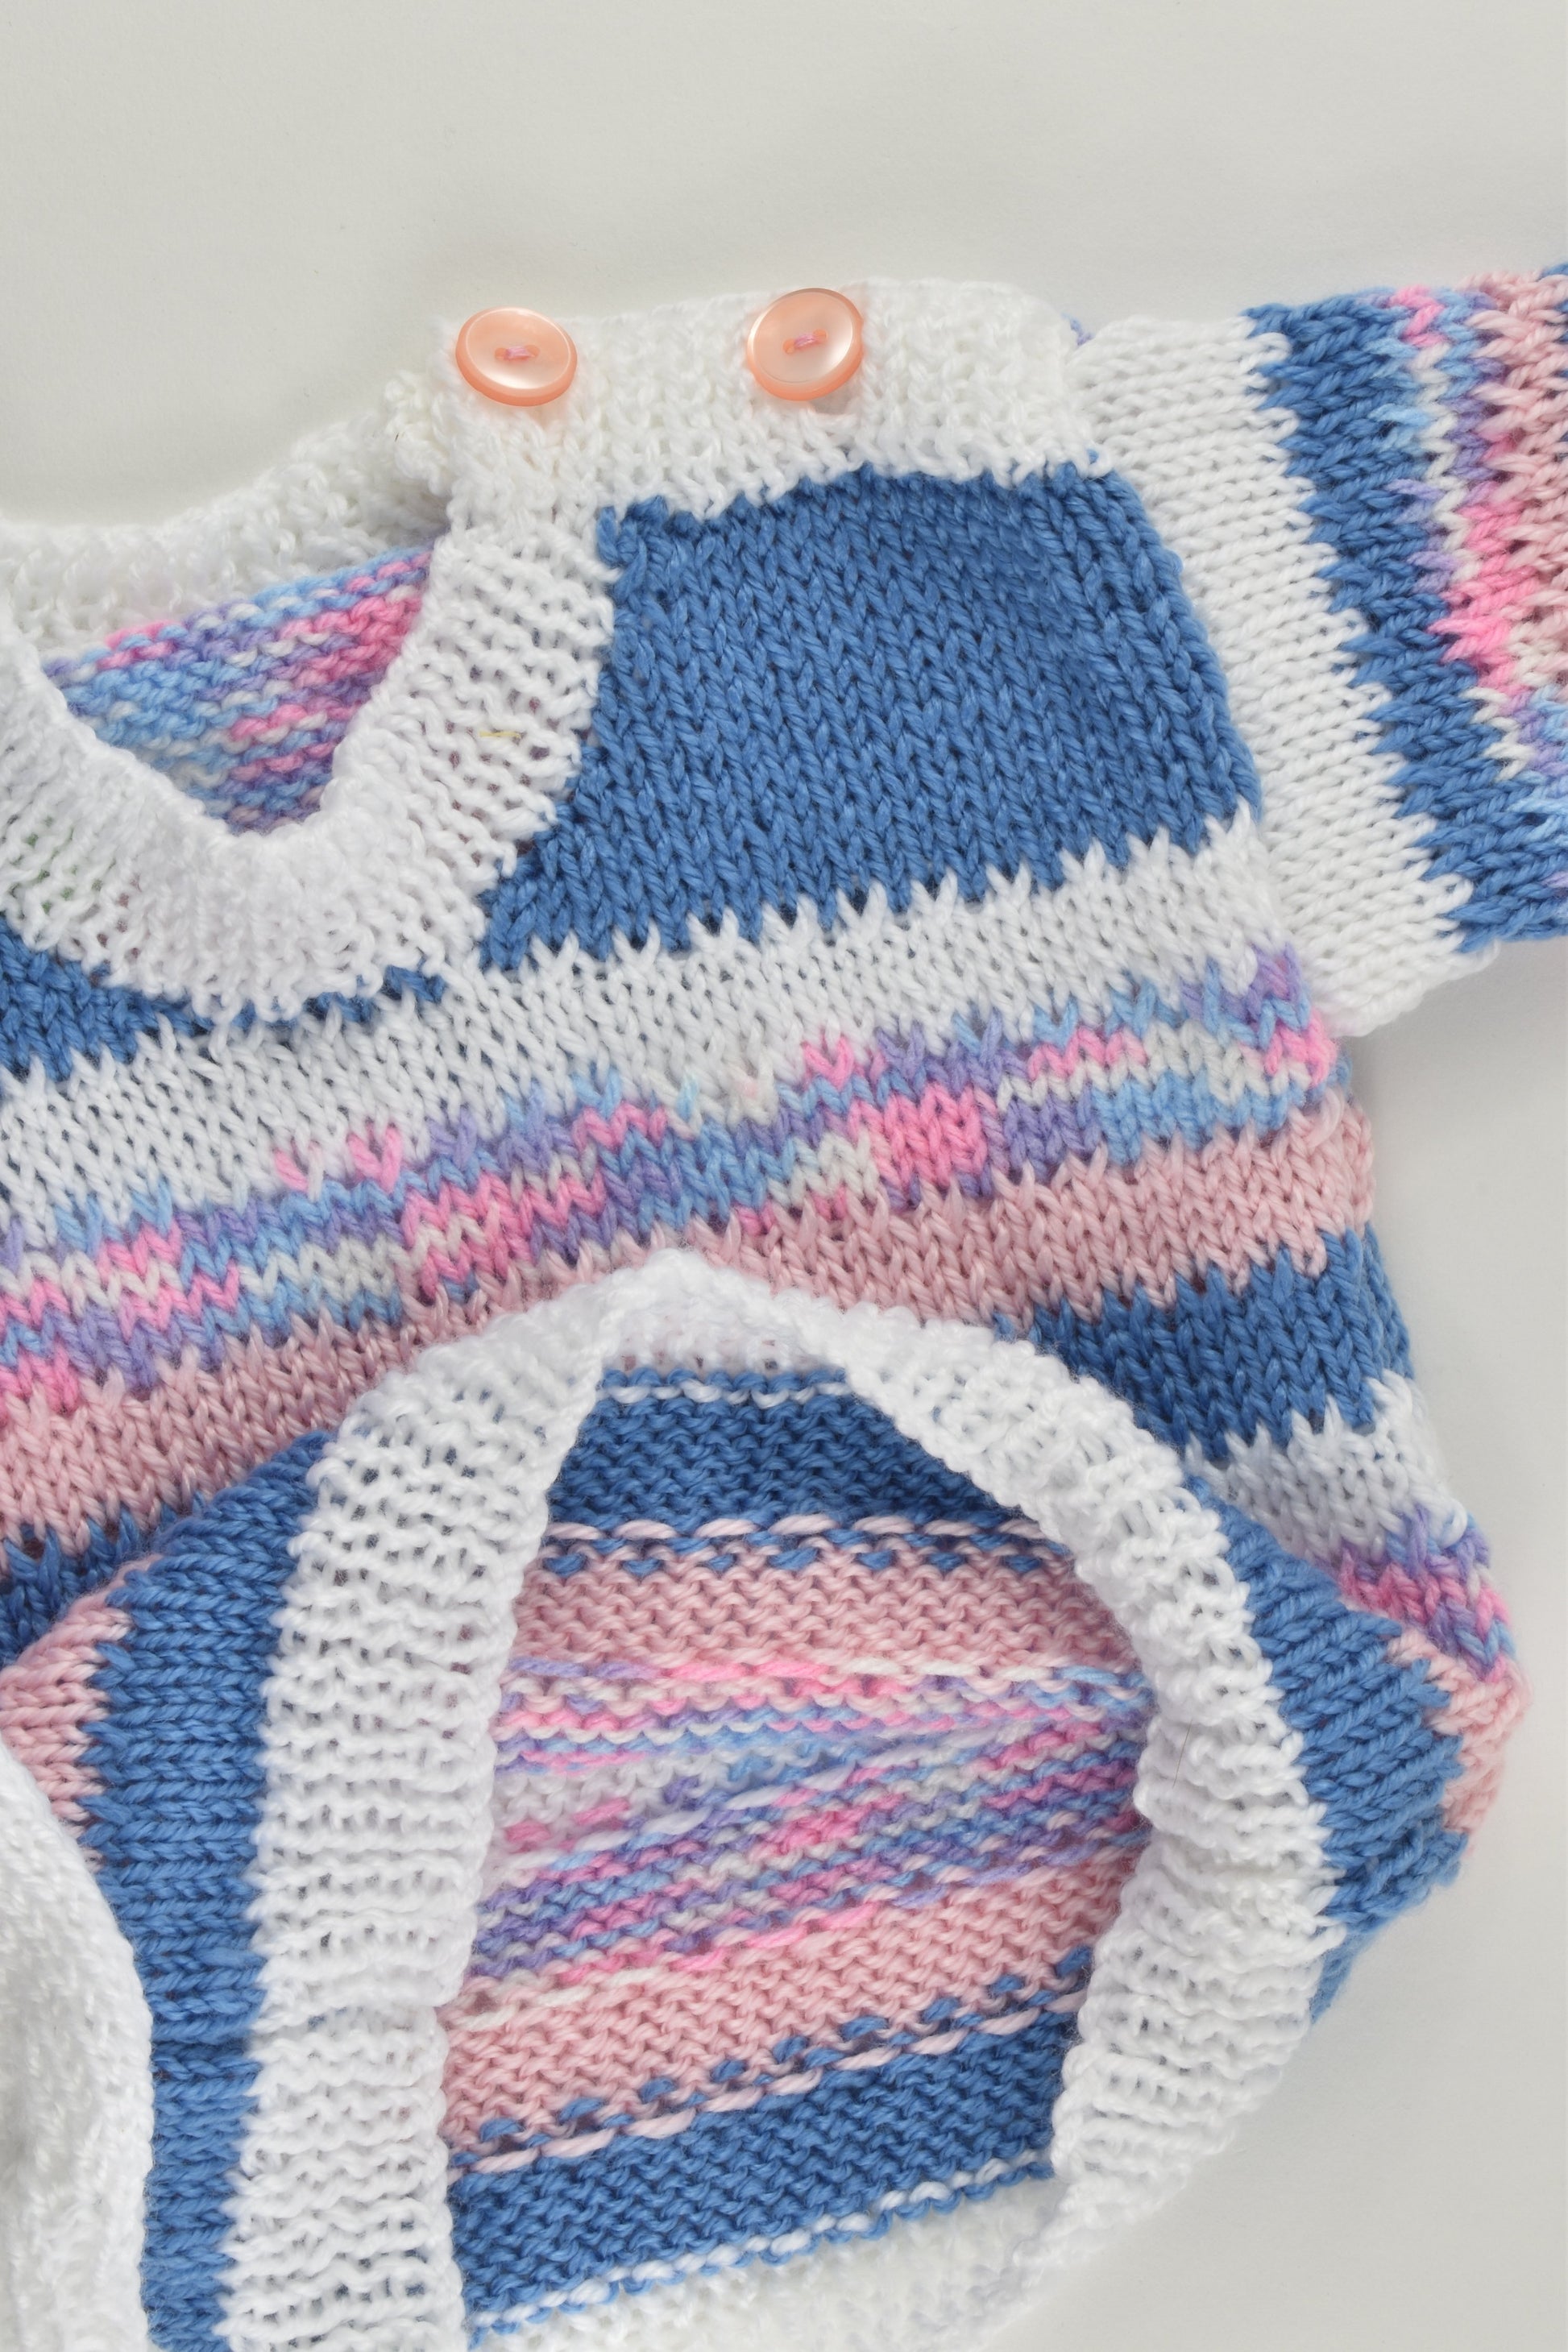 NEW Handmade Size approx 00-0 White, Pink and Blue Mix Knitted Jumper